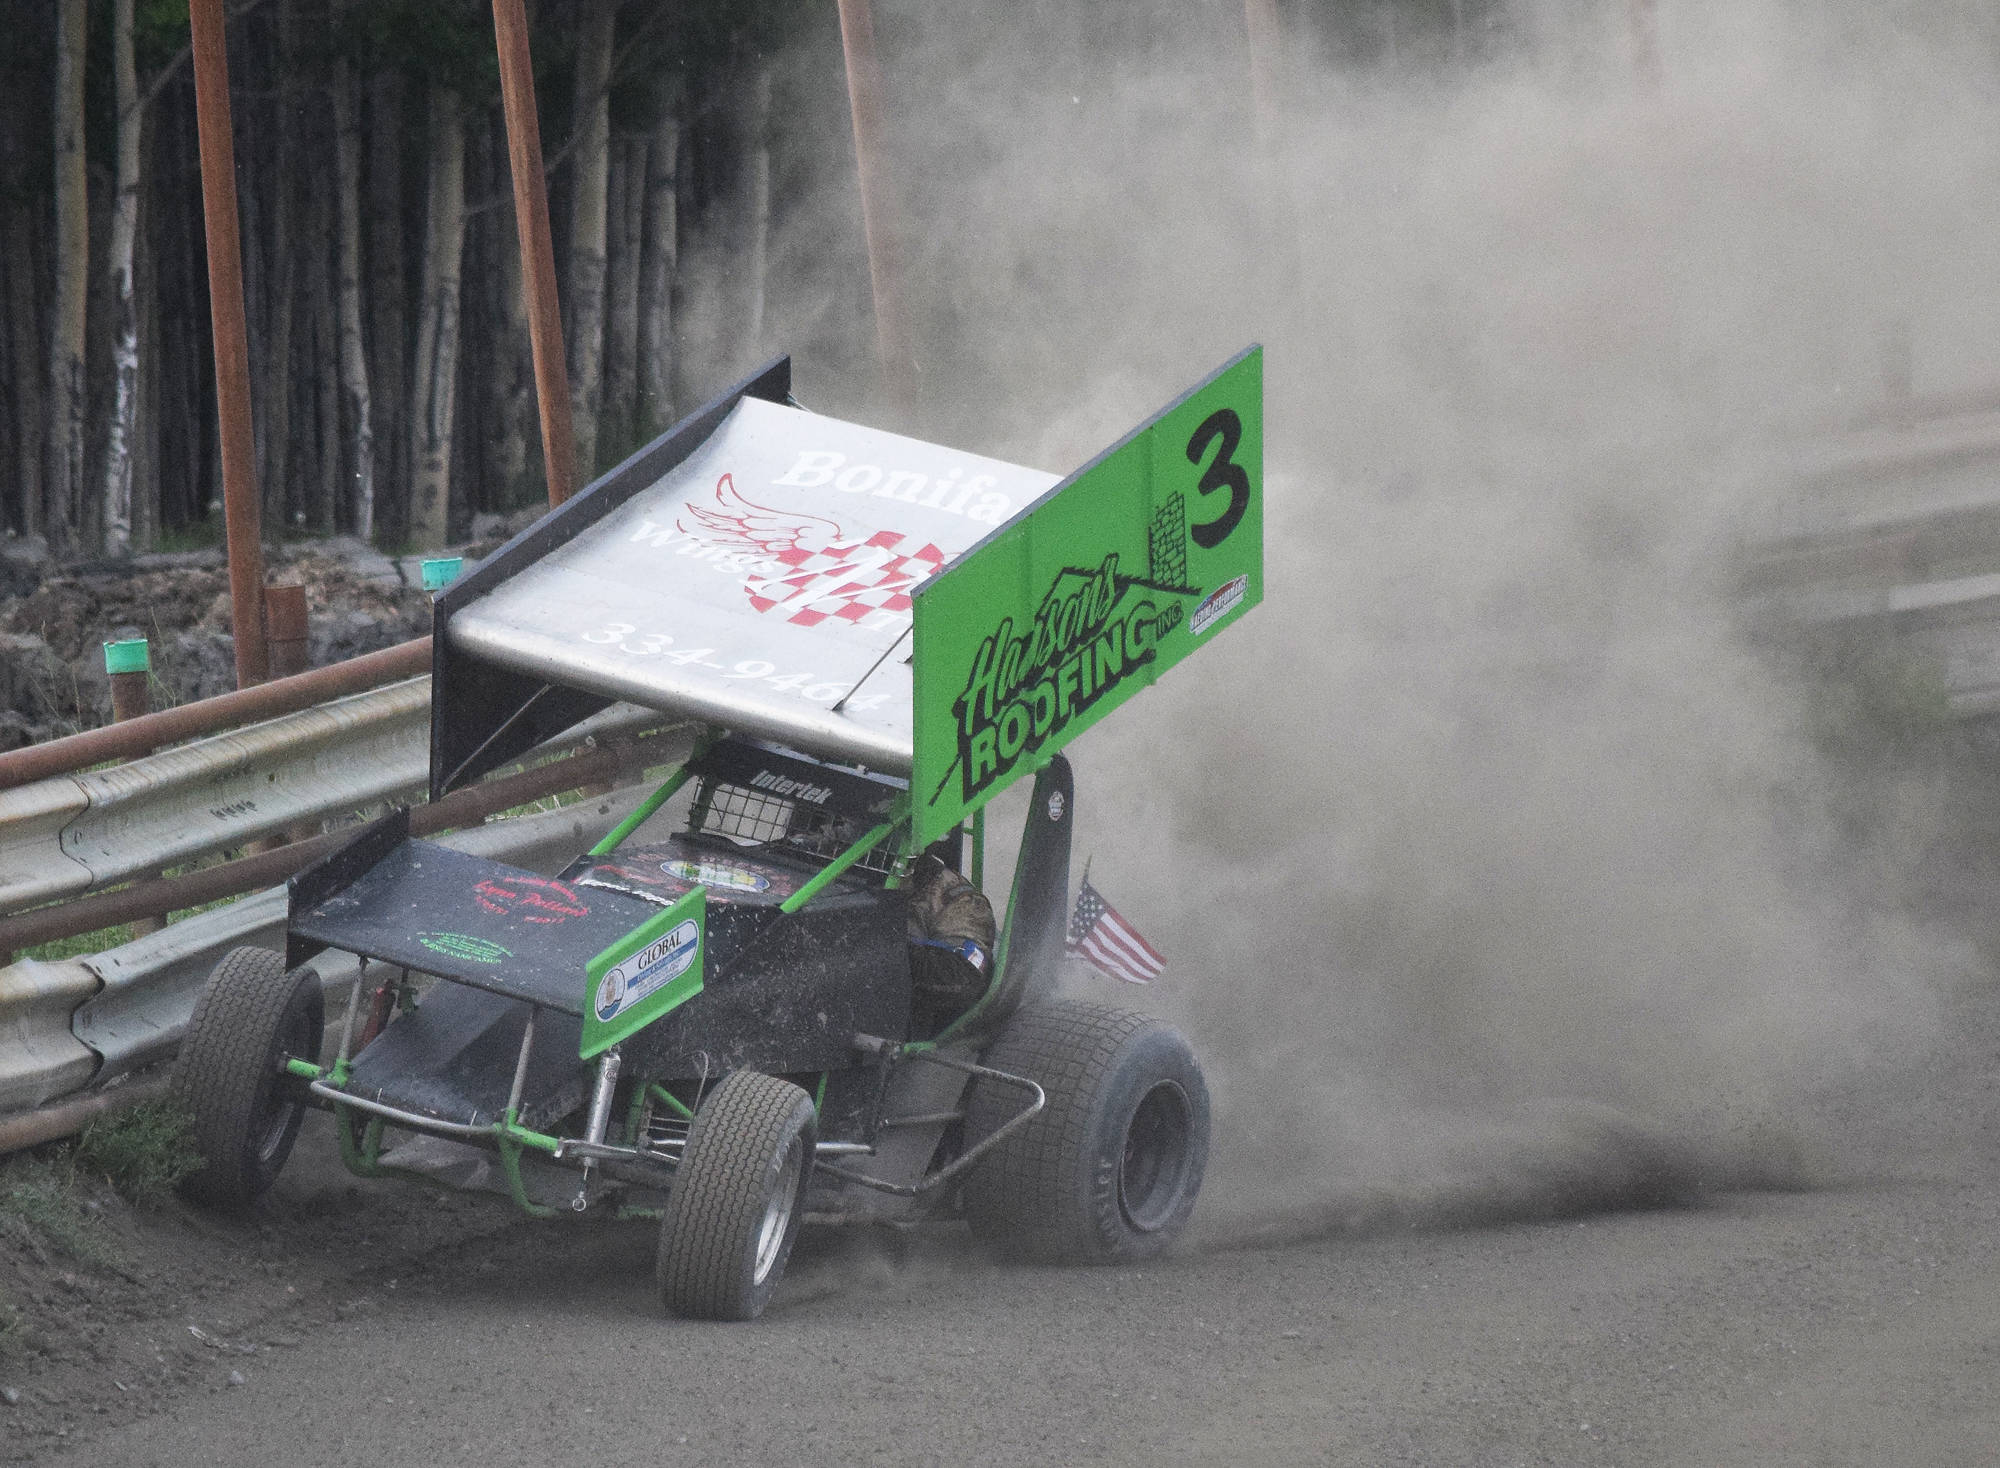 Sprint car driver Geoff Clark smacks the outside barrier during the Sprint feature event Saturday night at Twin City Raceway in Kenai. (Photo by Joey Klecka/Peninsula Clarion)